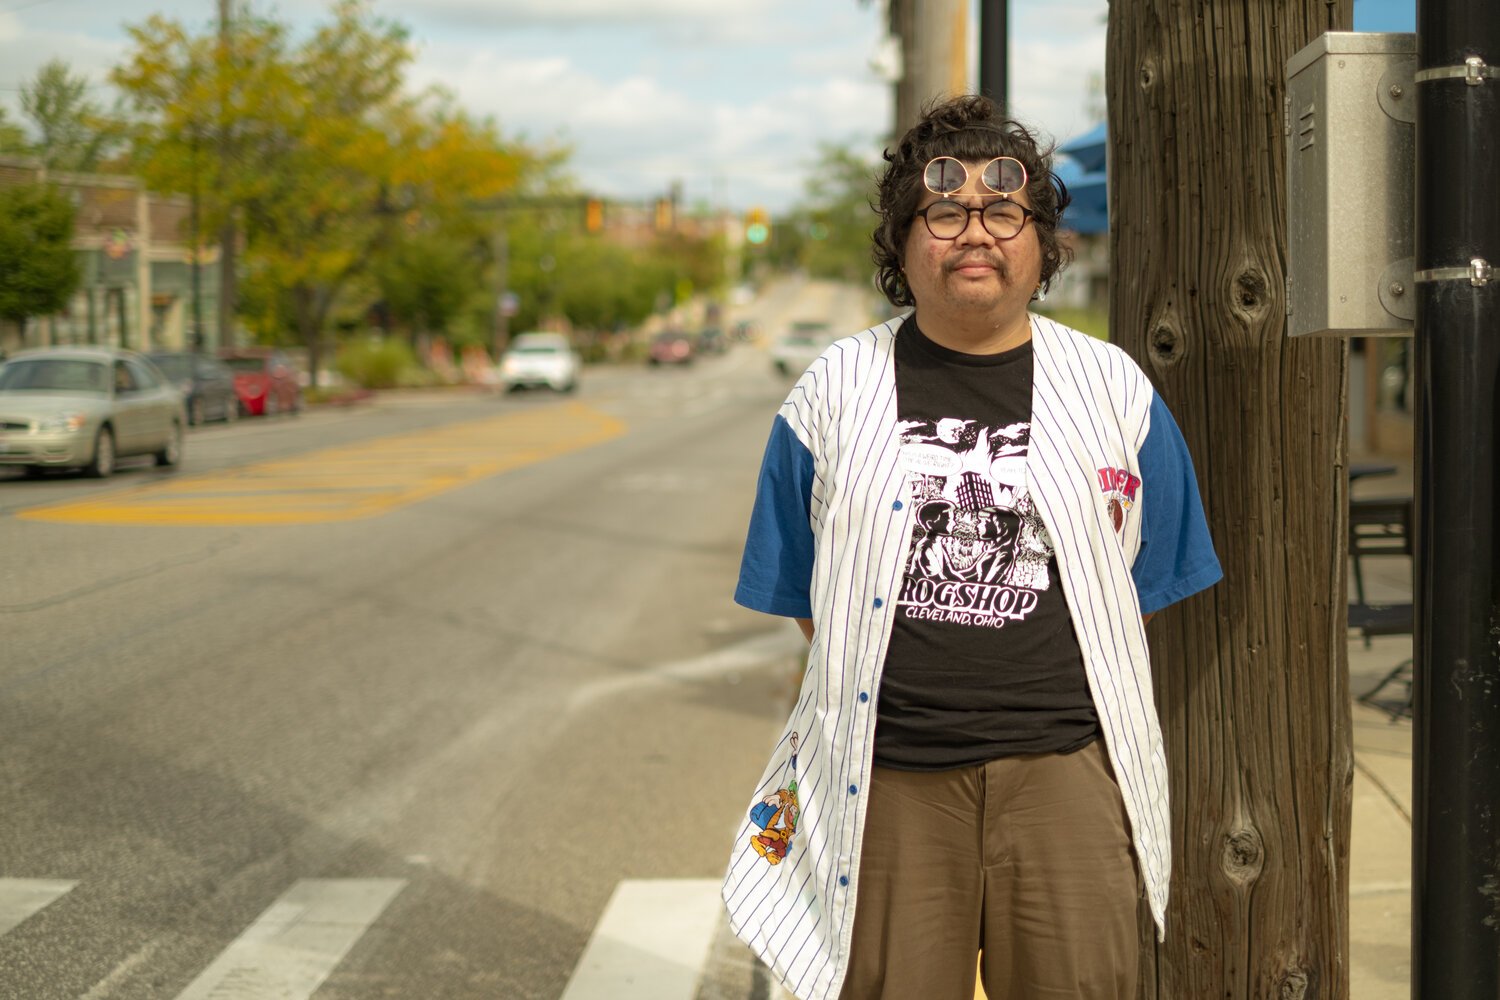 Why bother? Greater Cleveland’s youth rise to the task of local civic engagement